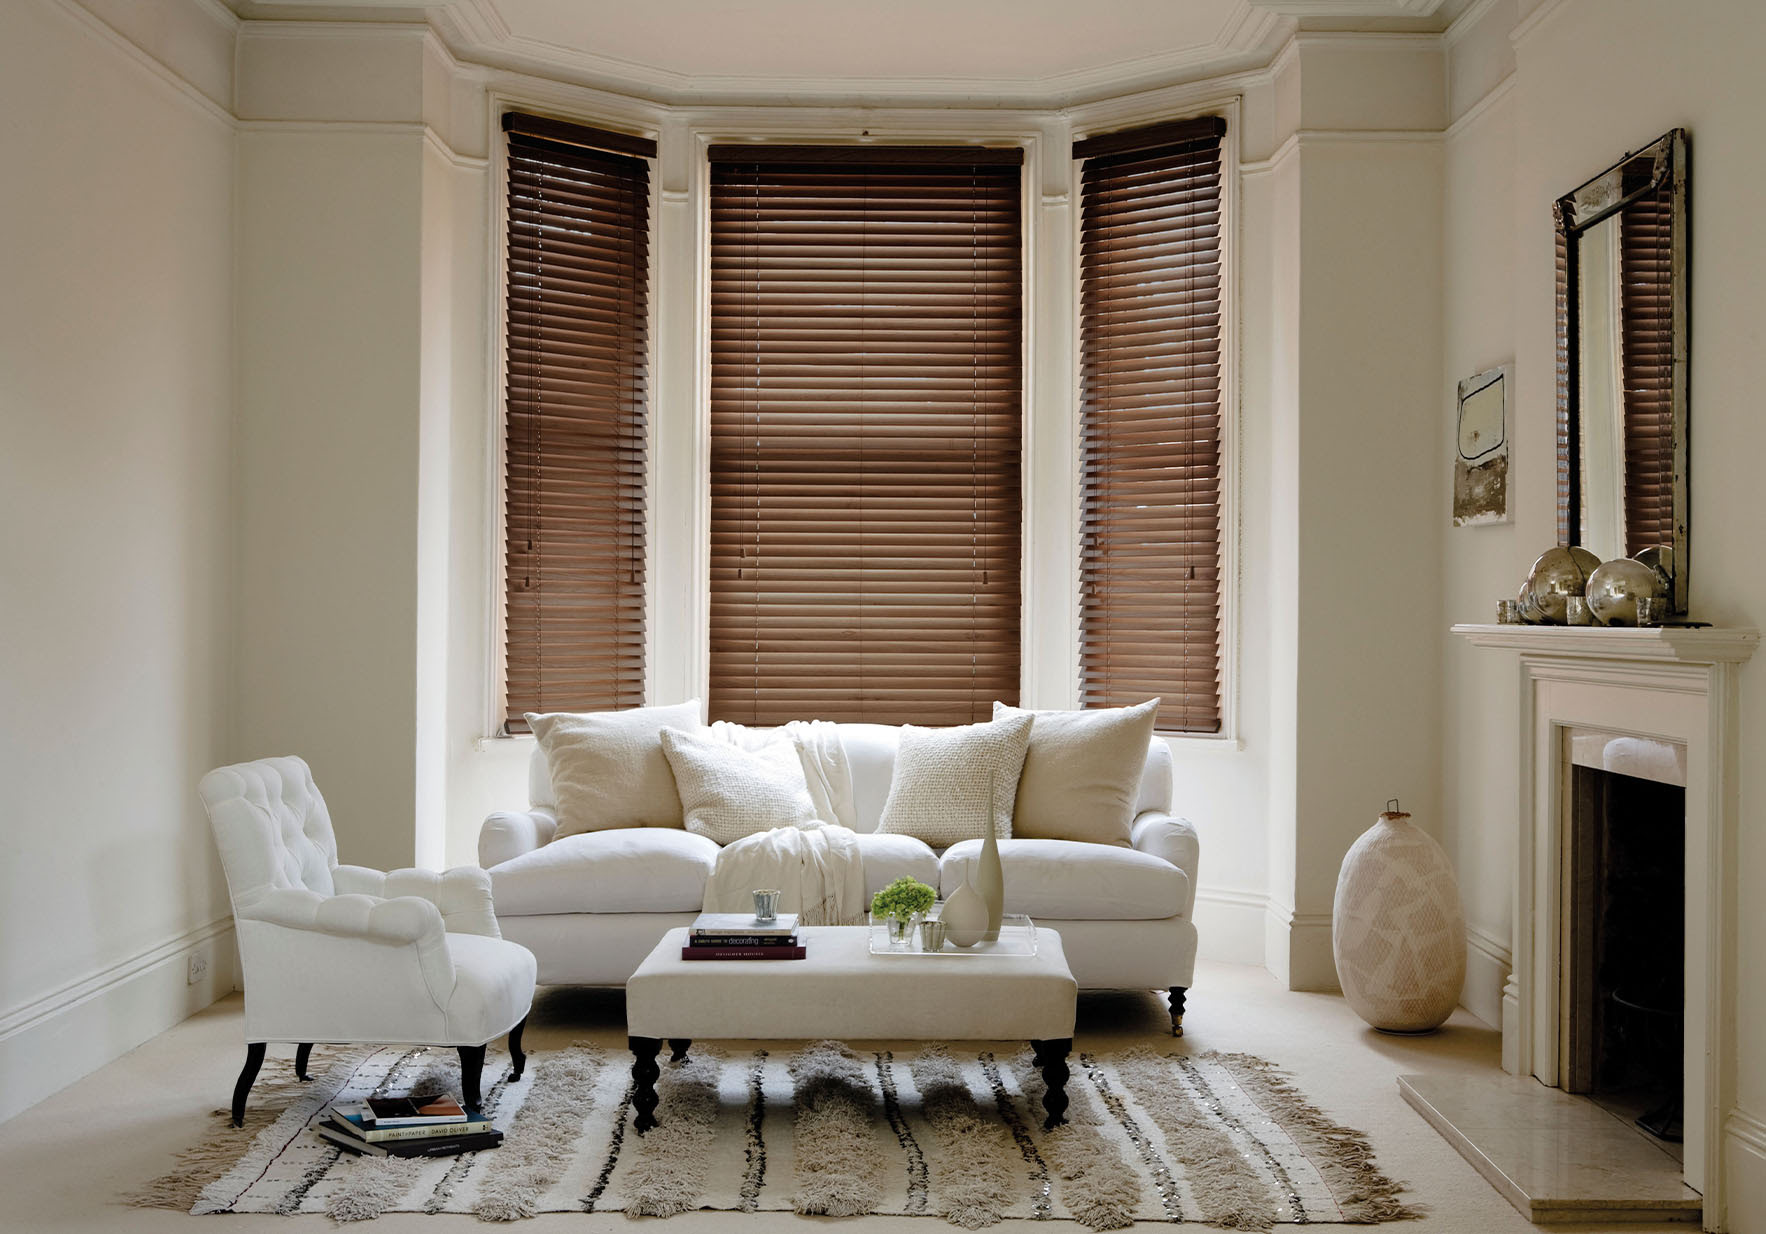 How To Measure Bay Windows For Blinds